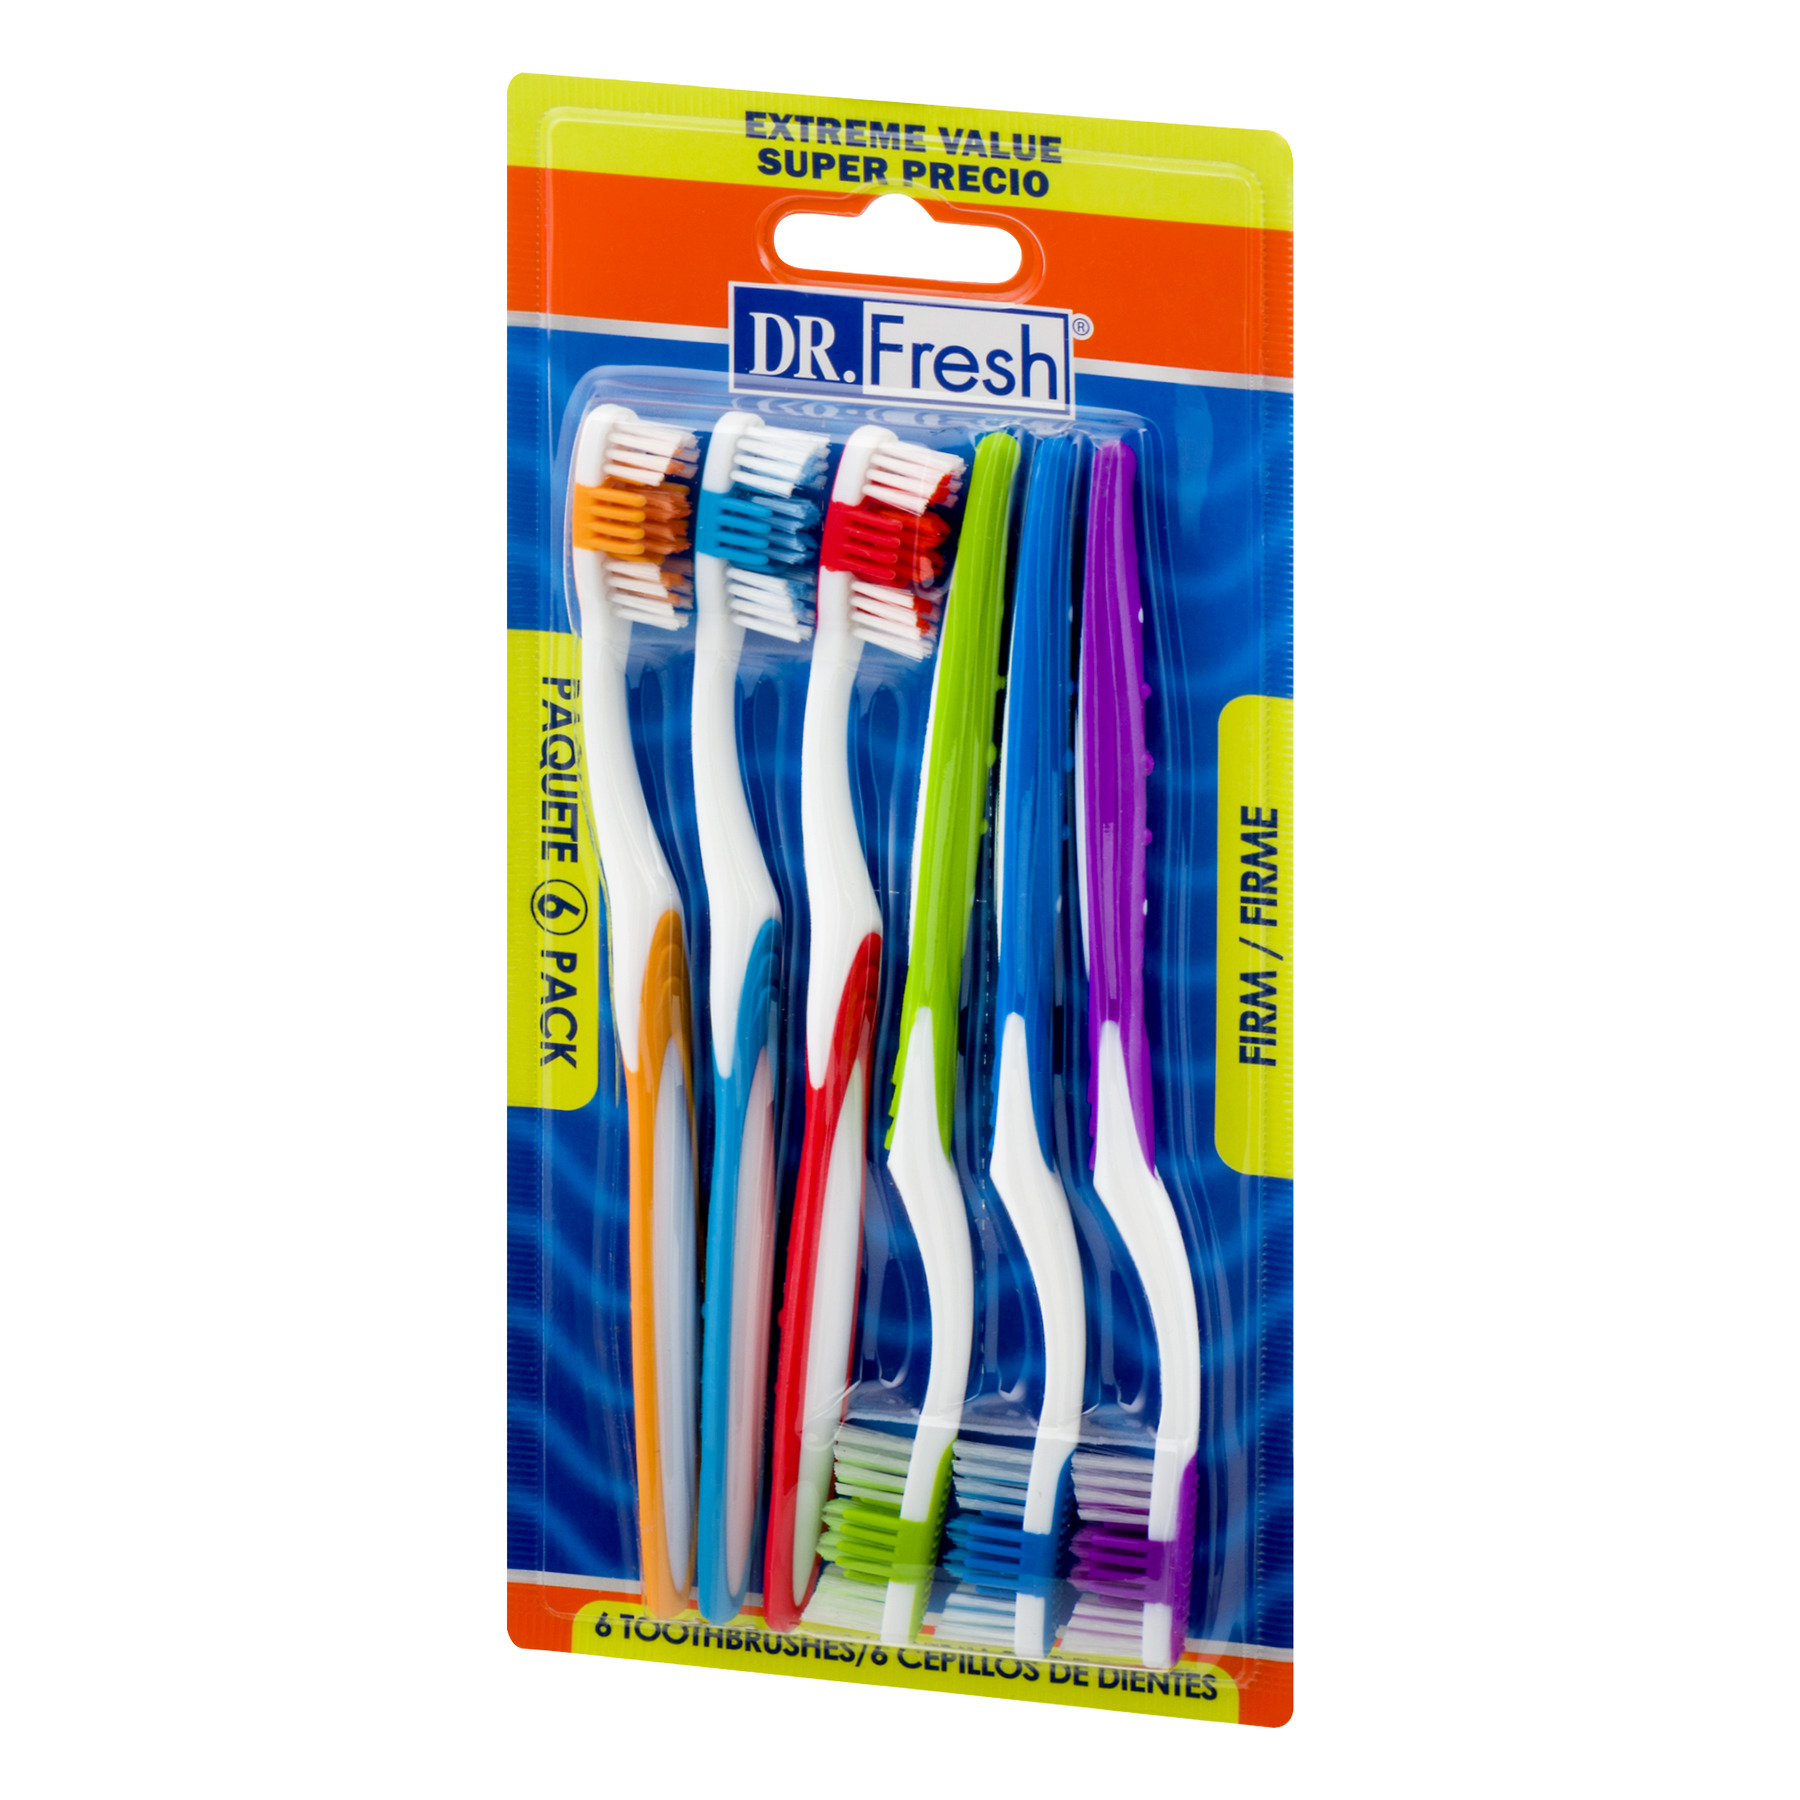 Dr. Fresh Dailies Toothbrushes, Firm, 6 Ct - image 3 of 5